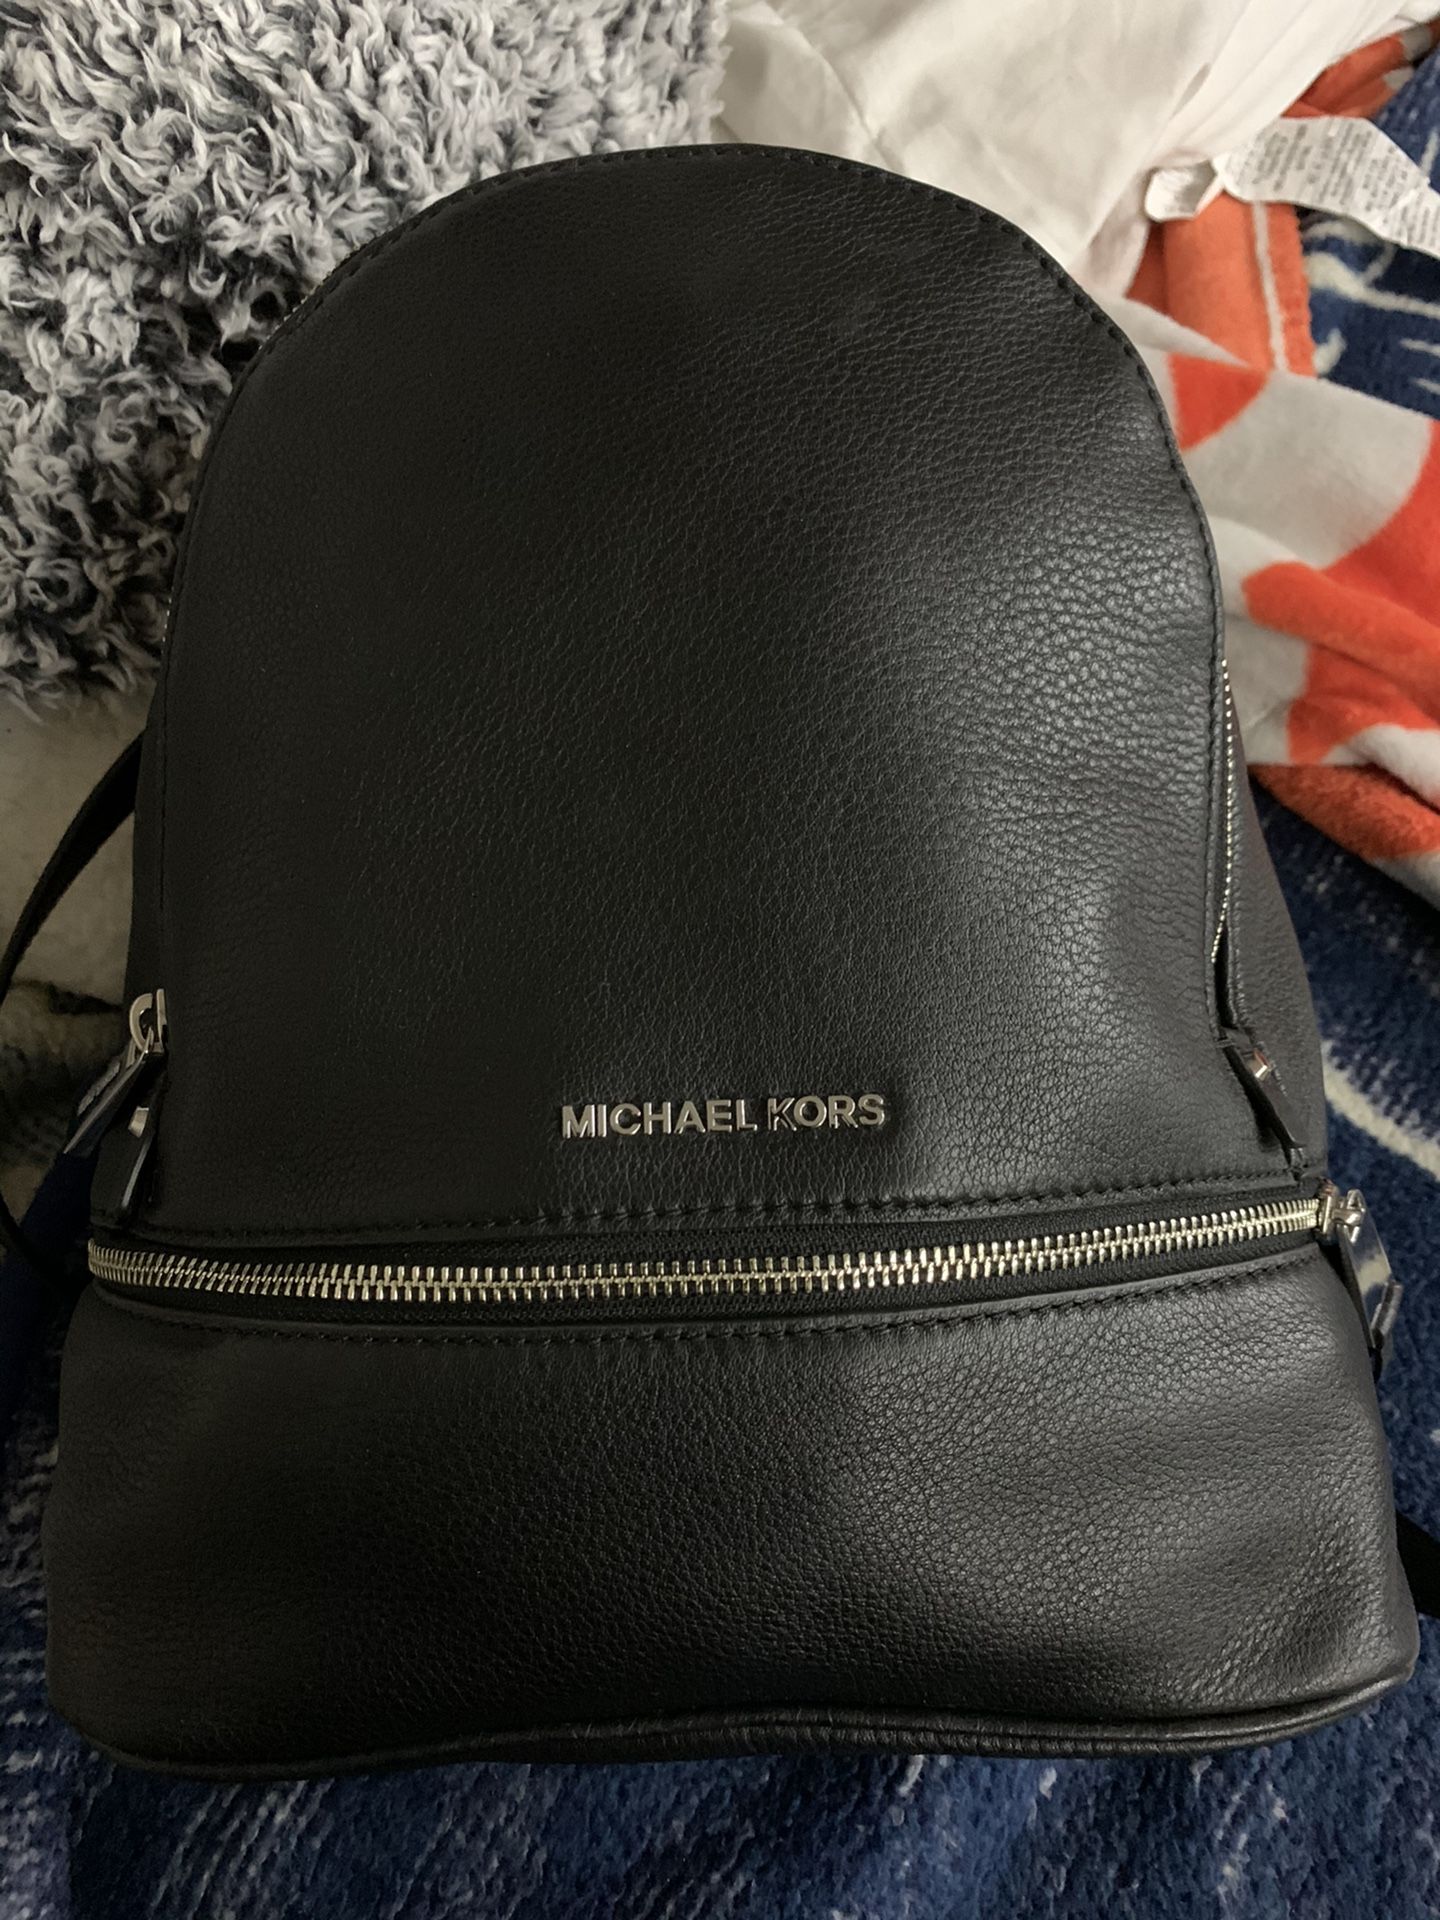 Michael Kors Leather Back Pack Brand Néw Never Used